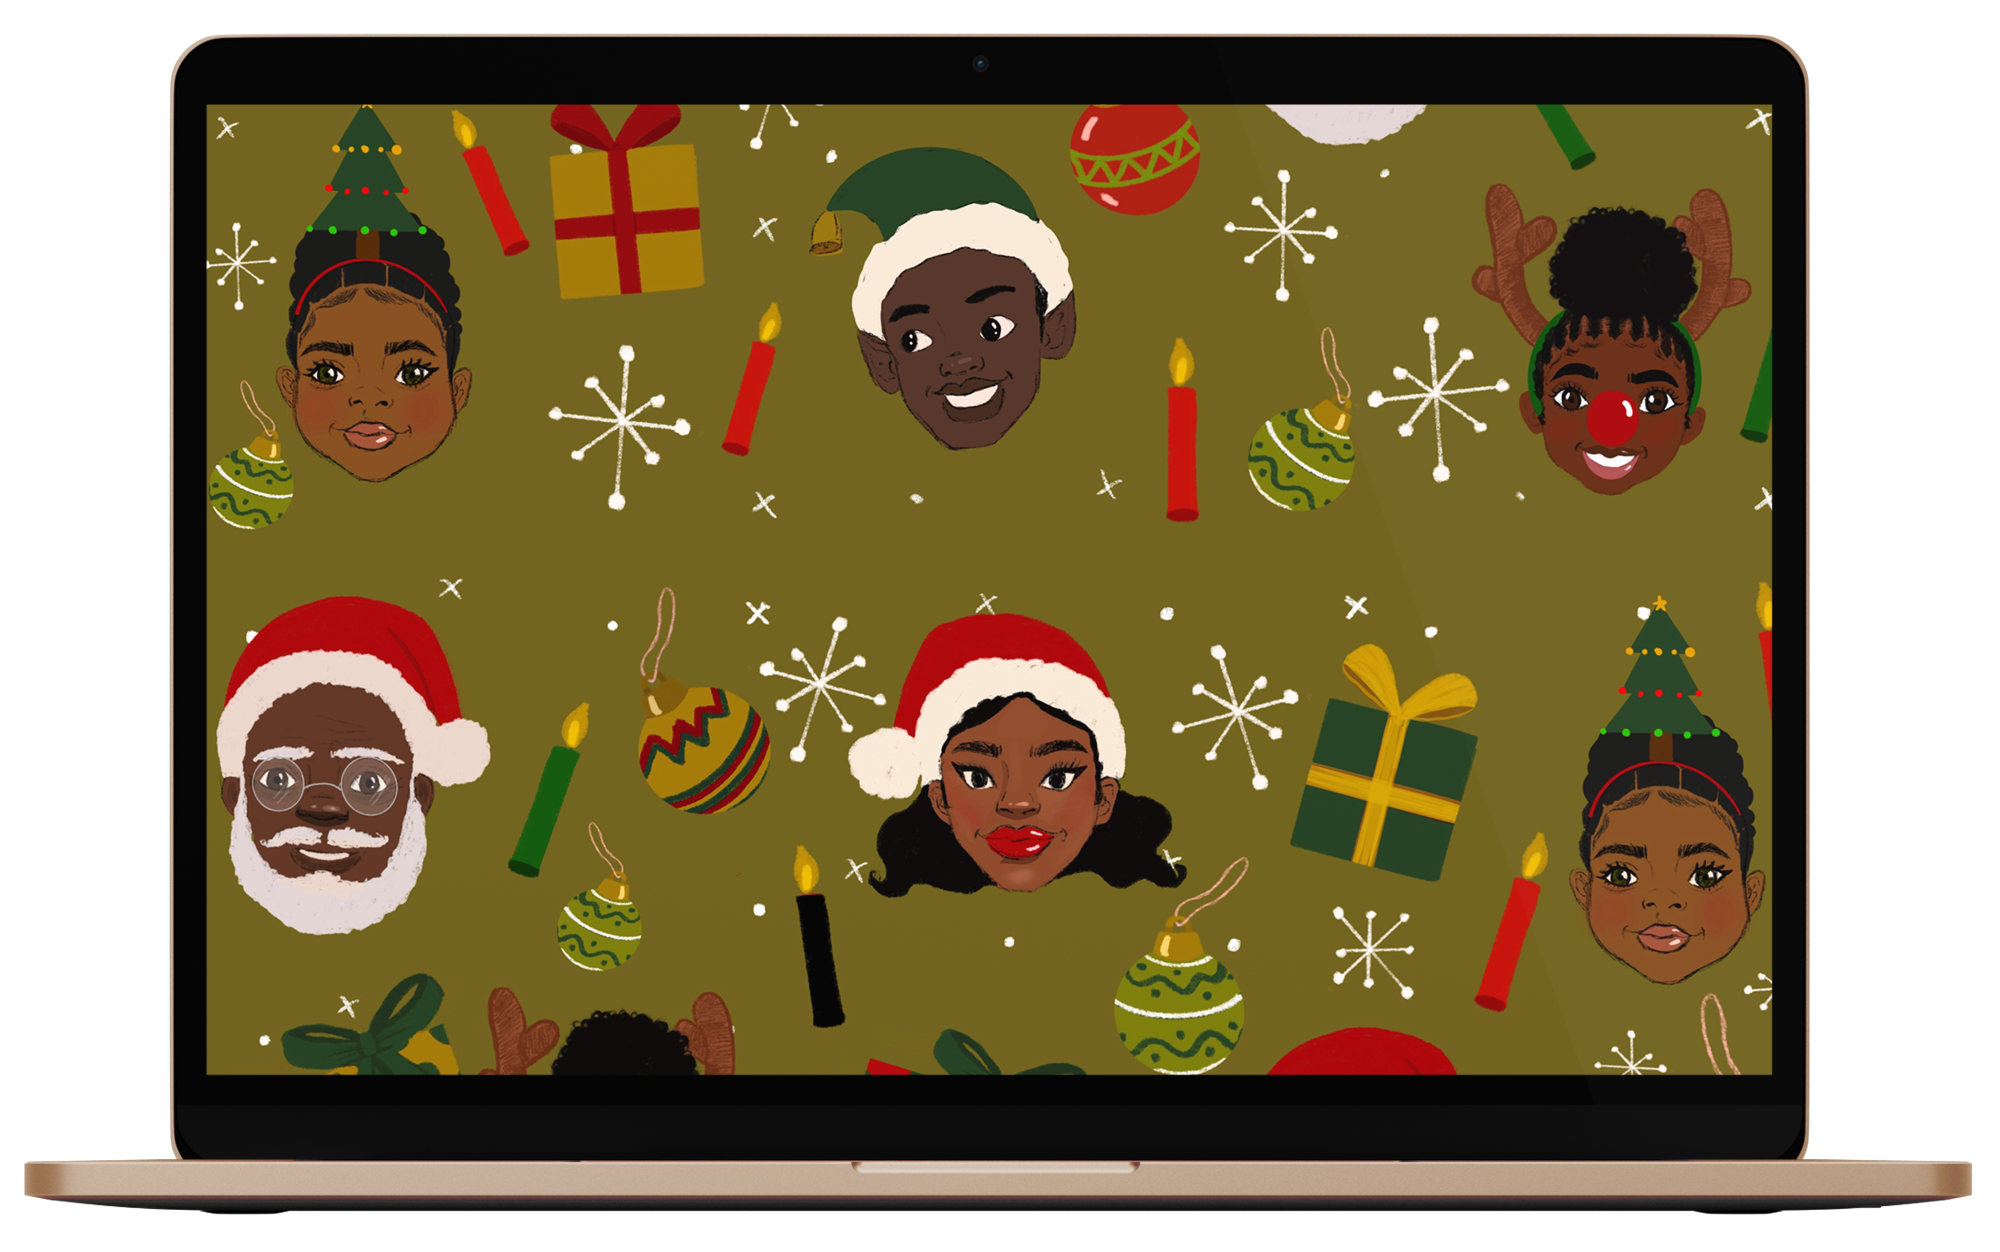 Wallpaper on a laptop wearing Santa hats, Christmas hats and reindeer ears with ornaments and presents in the background.